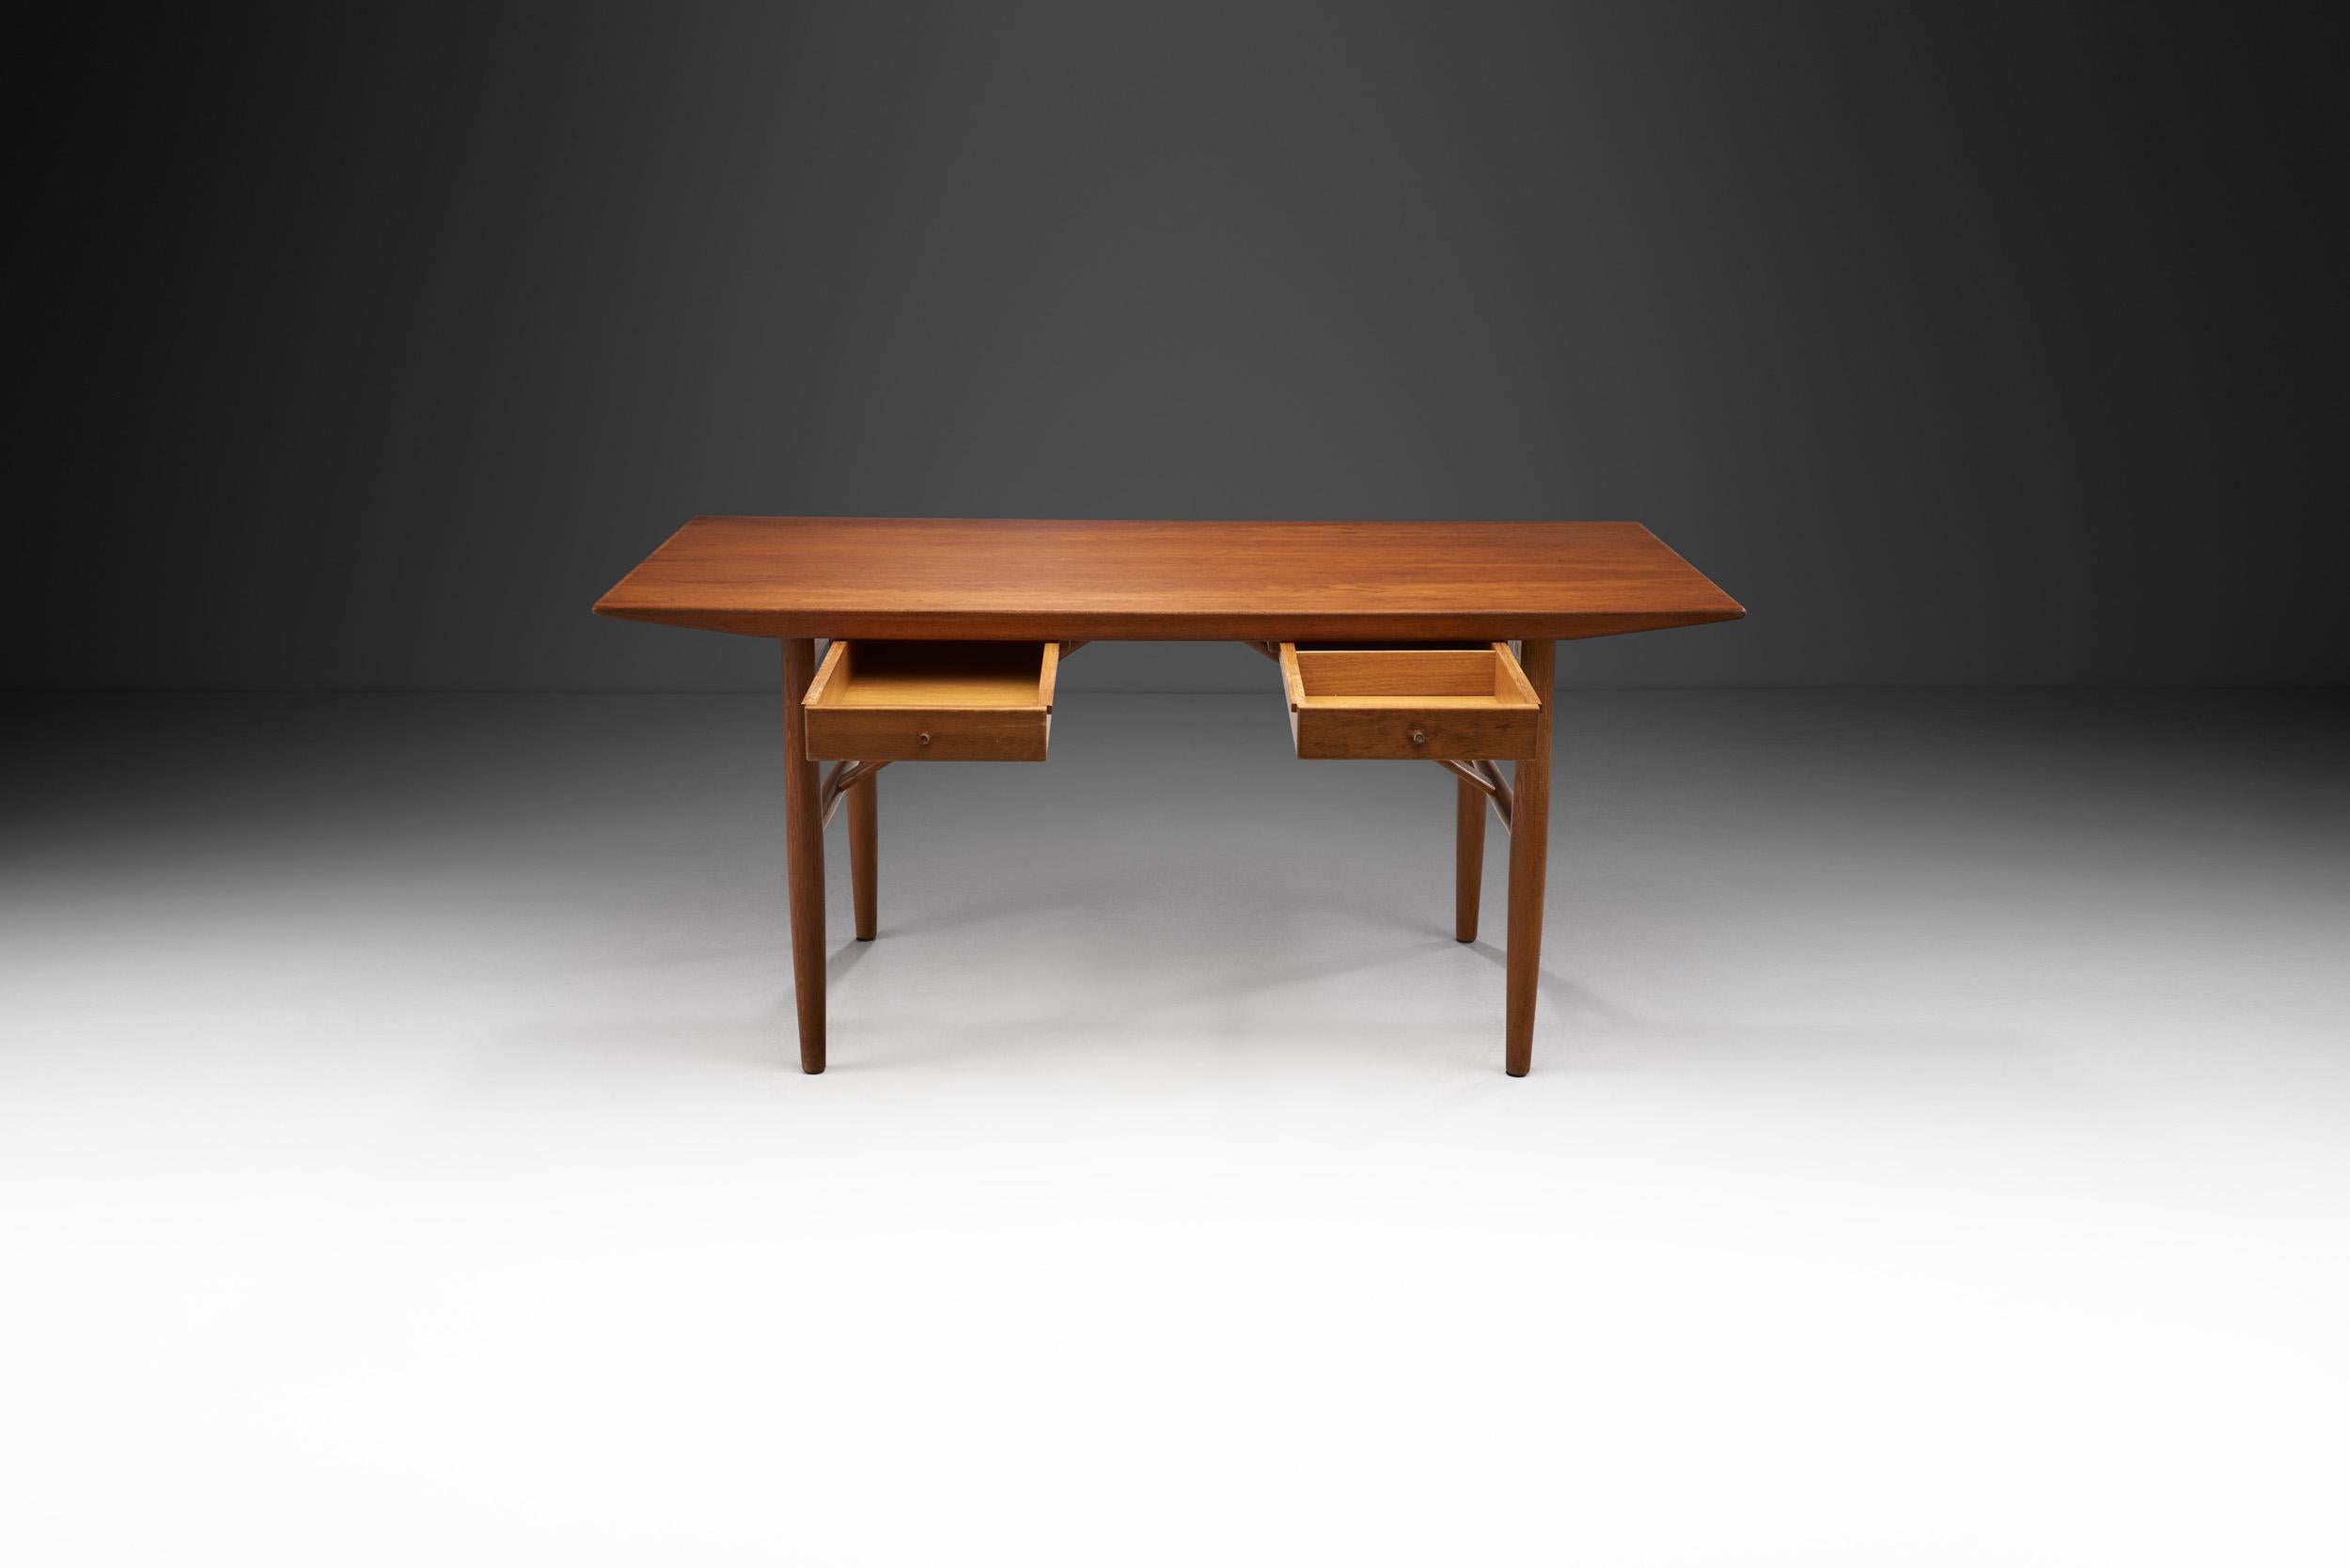 Mid-20th Century Danish Cabinetmaker Teak and Oak Desk with Drawers, Denmark, circa 1950s For Sale